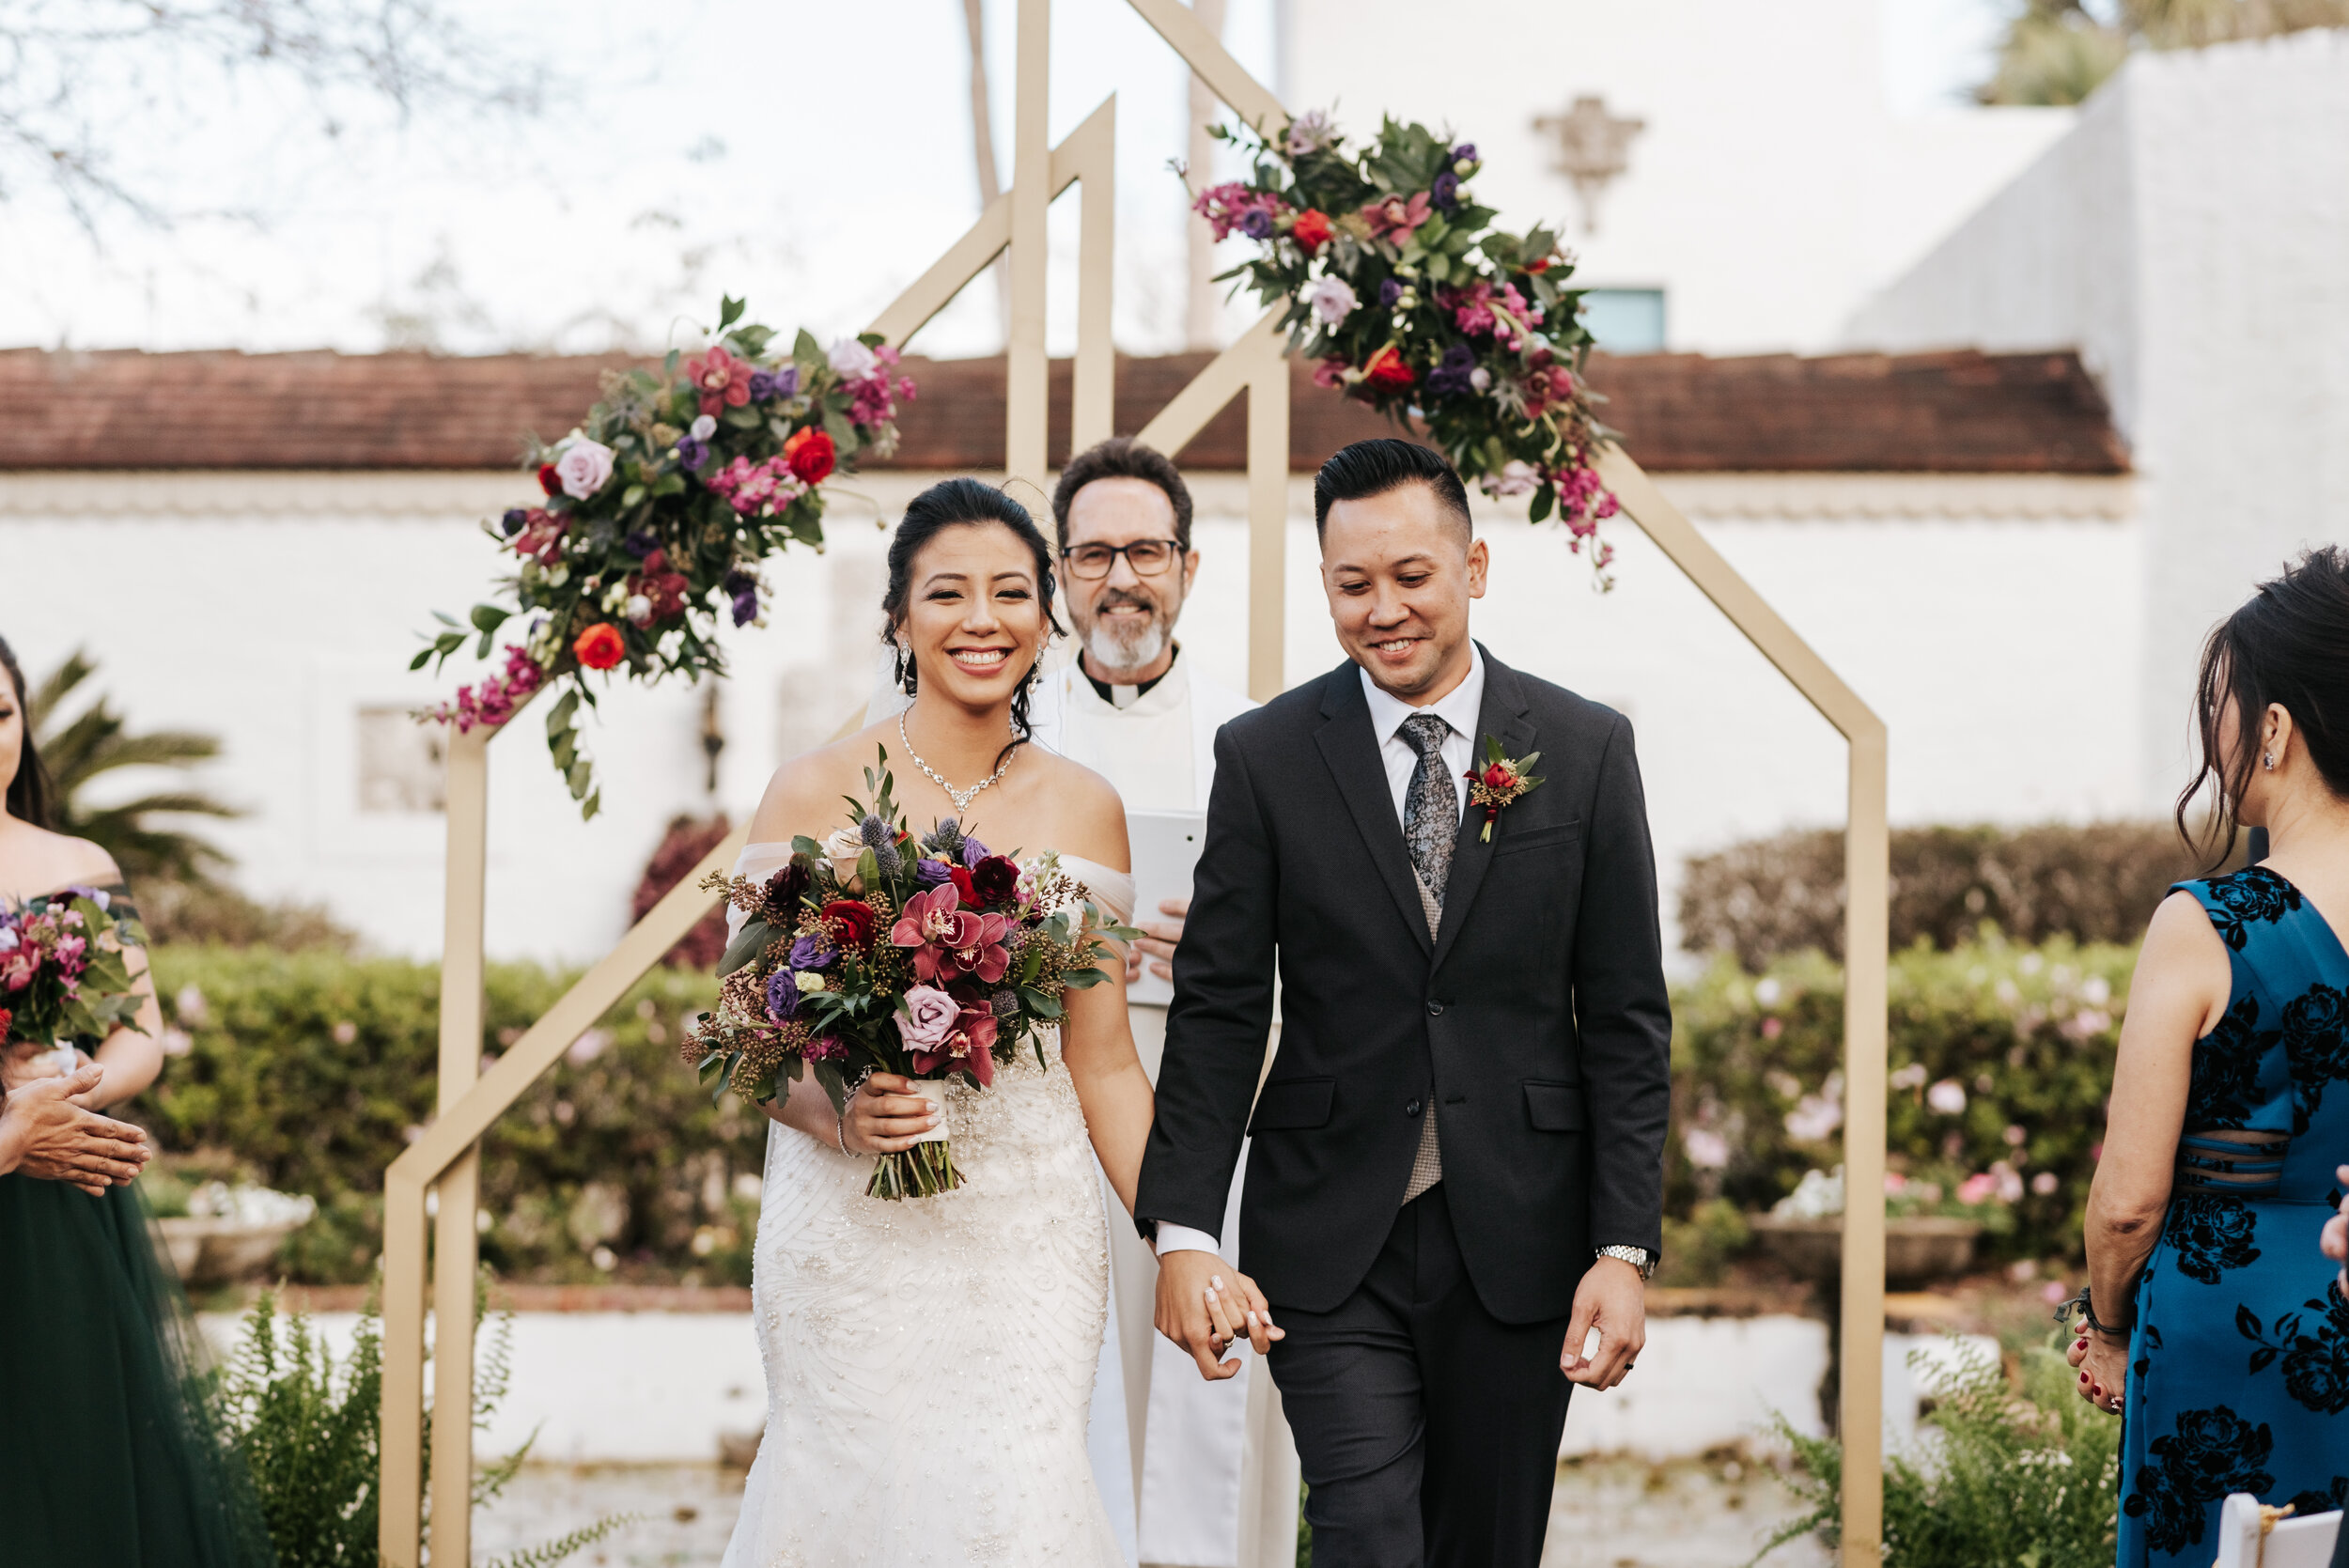 The bride and groom in front of their geometric arch decorated with jewel tone floral pieces (Copy) (Copy)